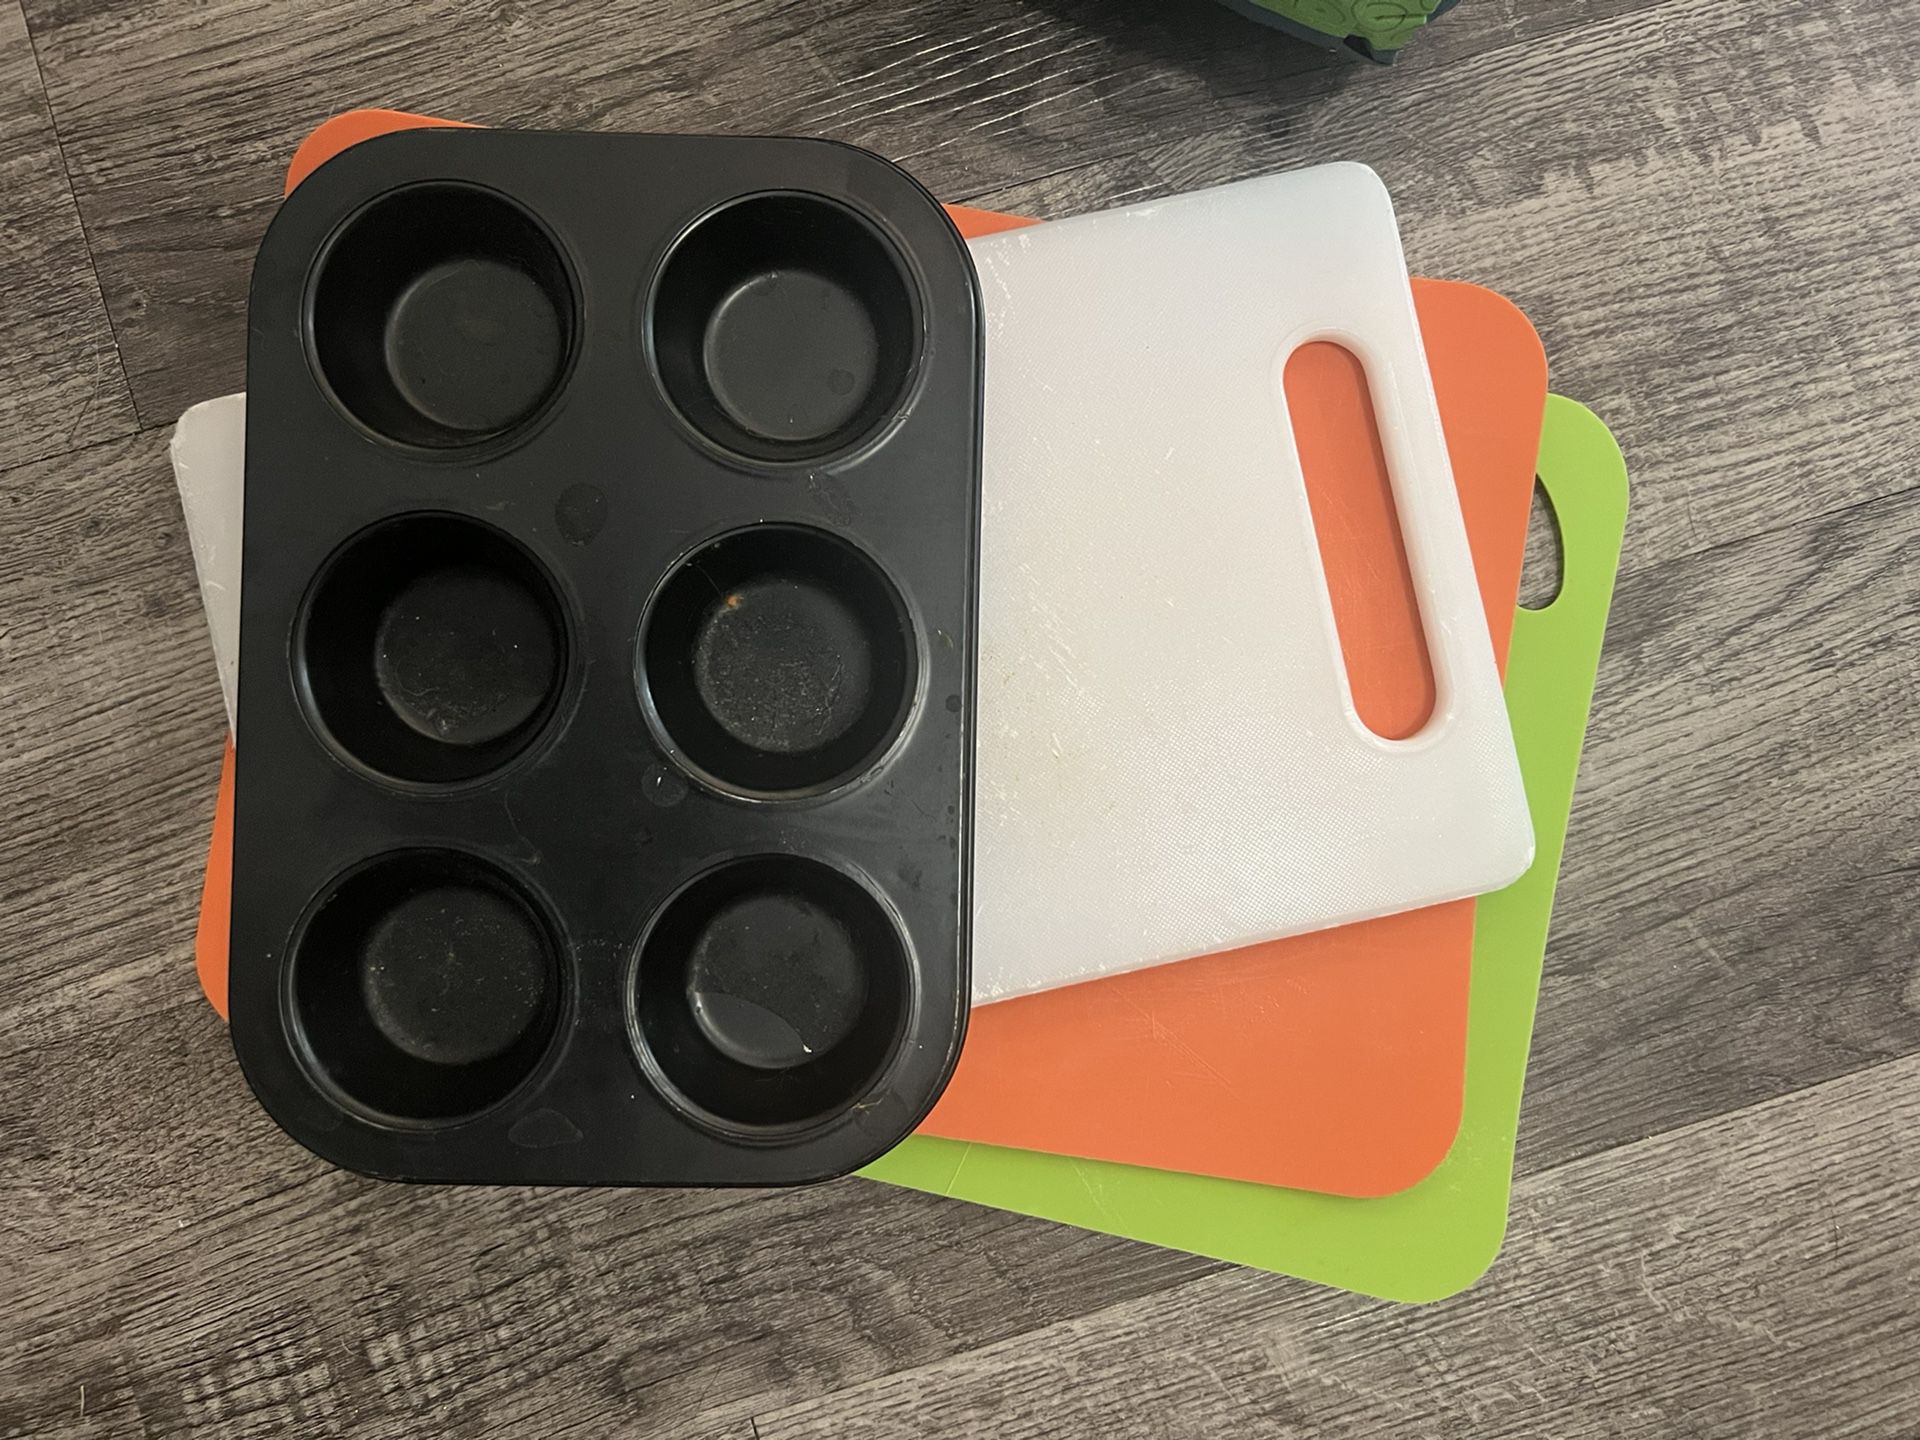 Cutting Boards And Muffin Tray